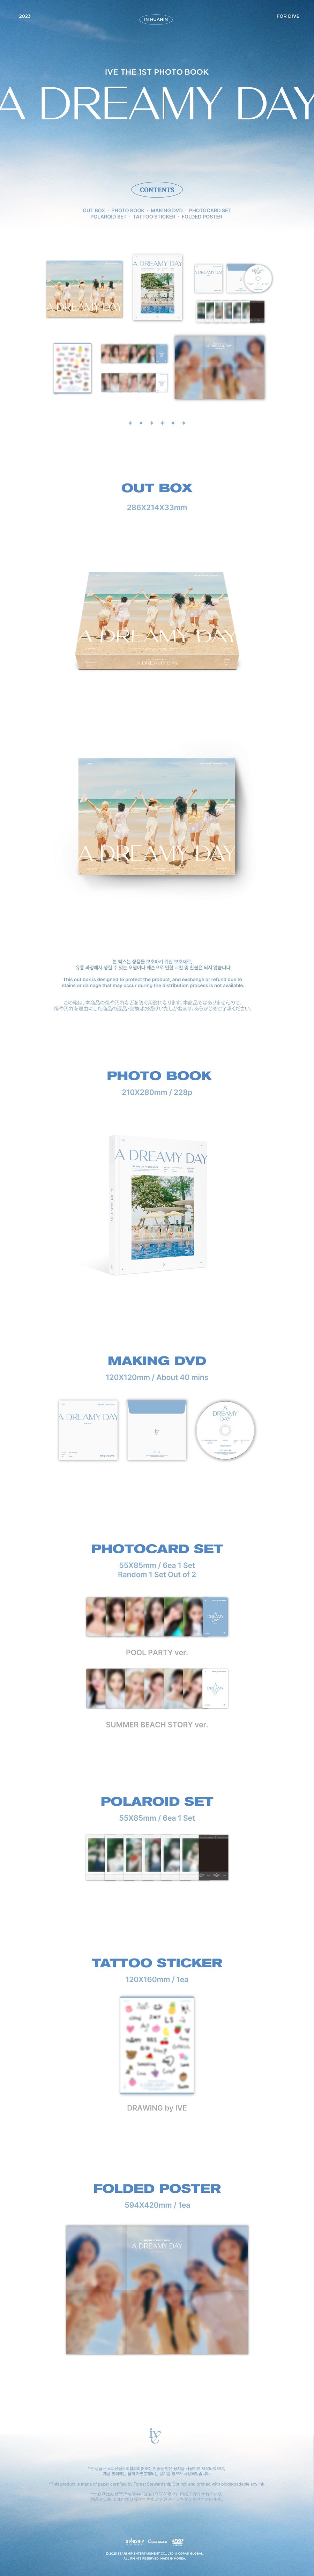 IVE - THE 1ST PHOTOBOOK_A DREAMY DAY